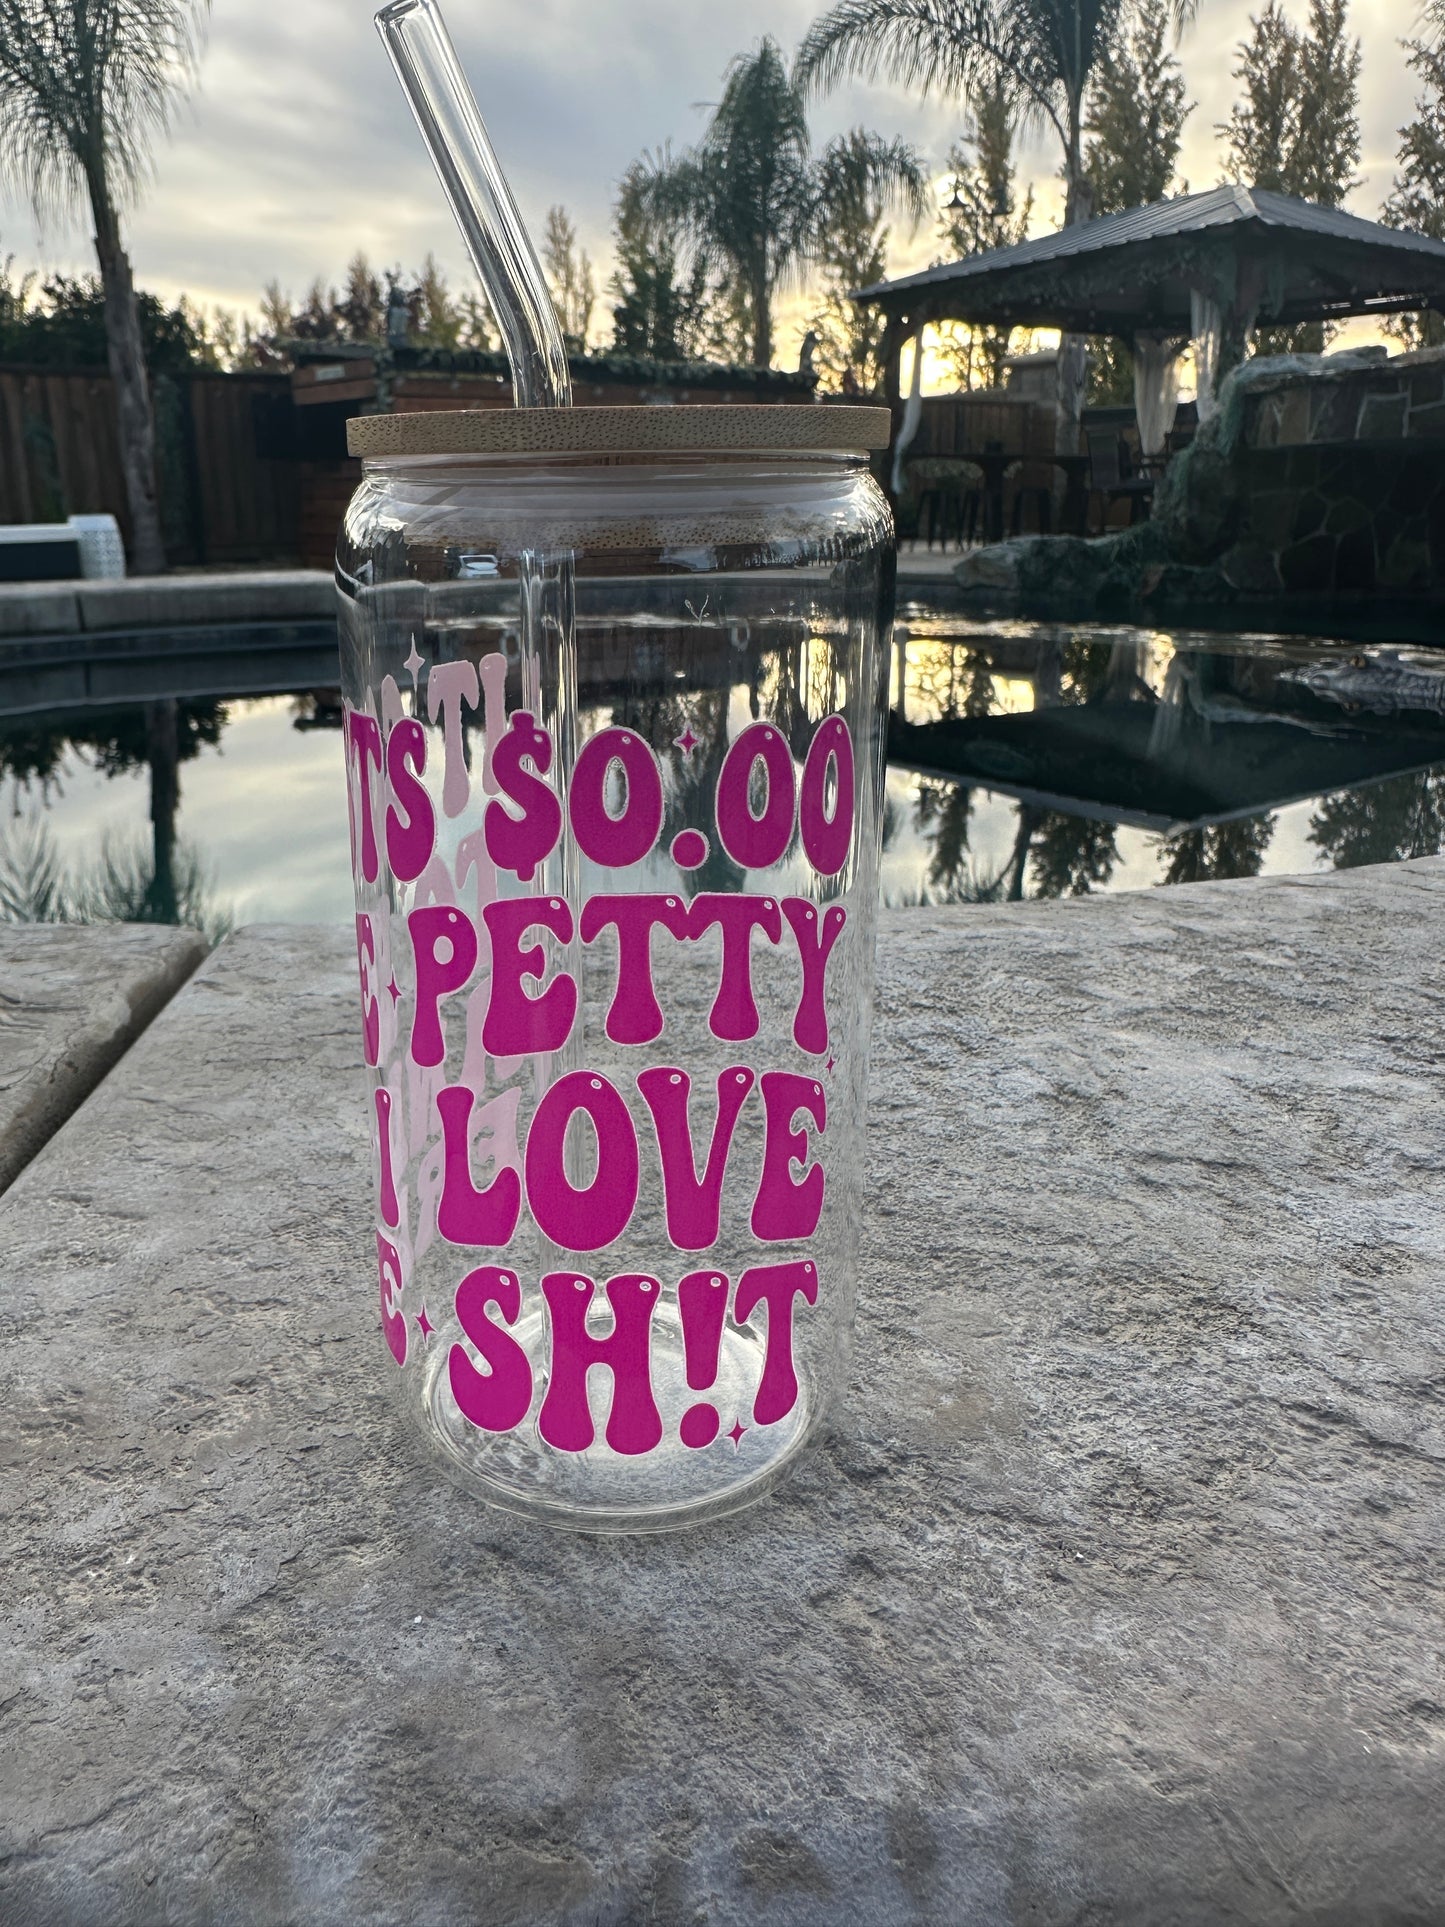 It cost 0.00 to be petty glass can